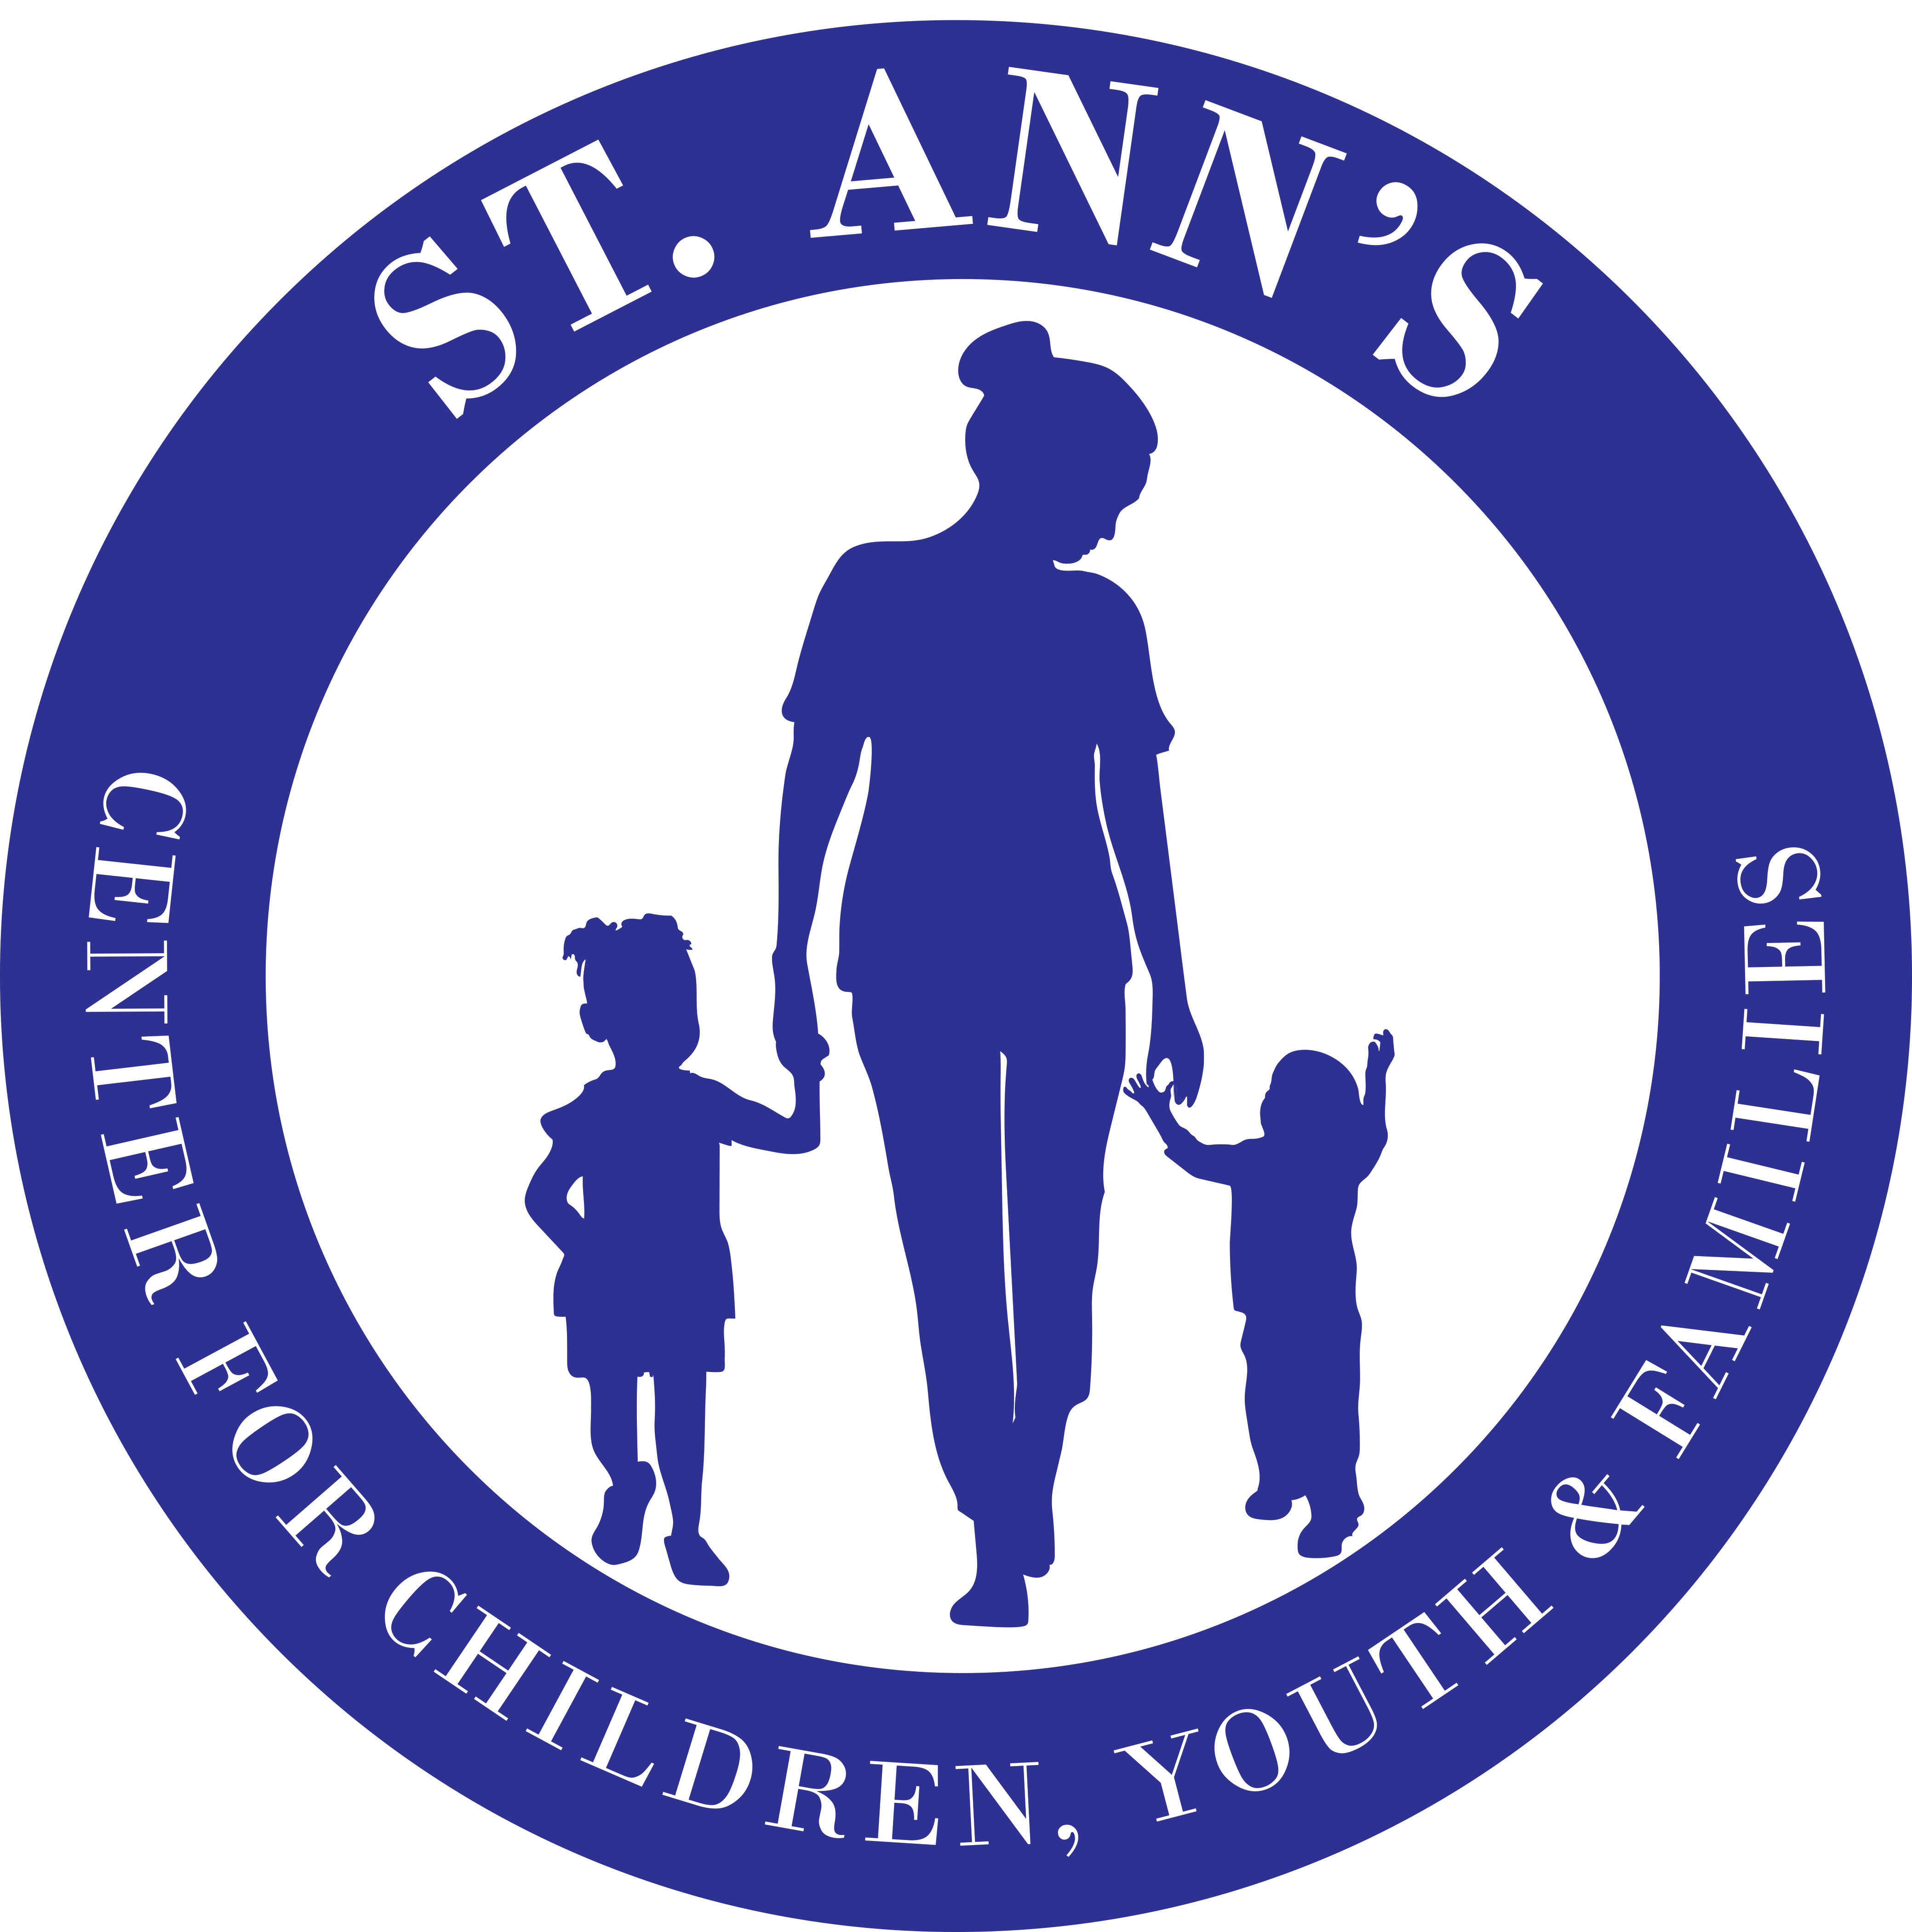 St. Ann’s Center for Children, Youth and Families